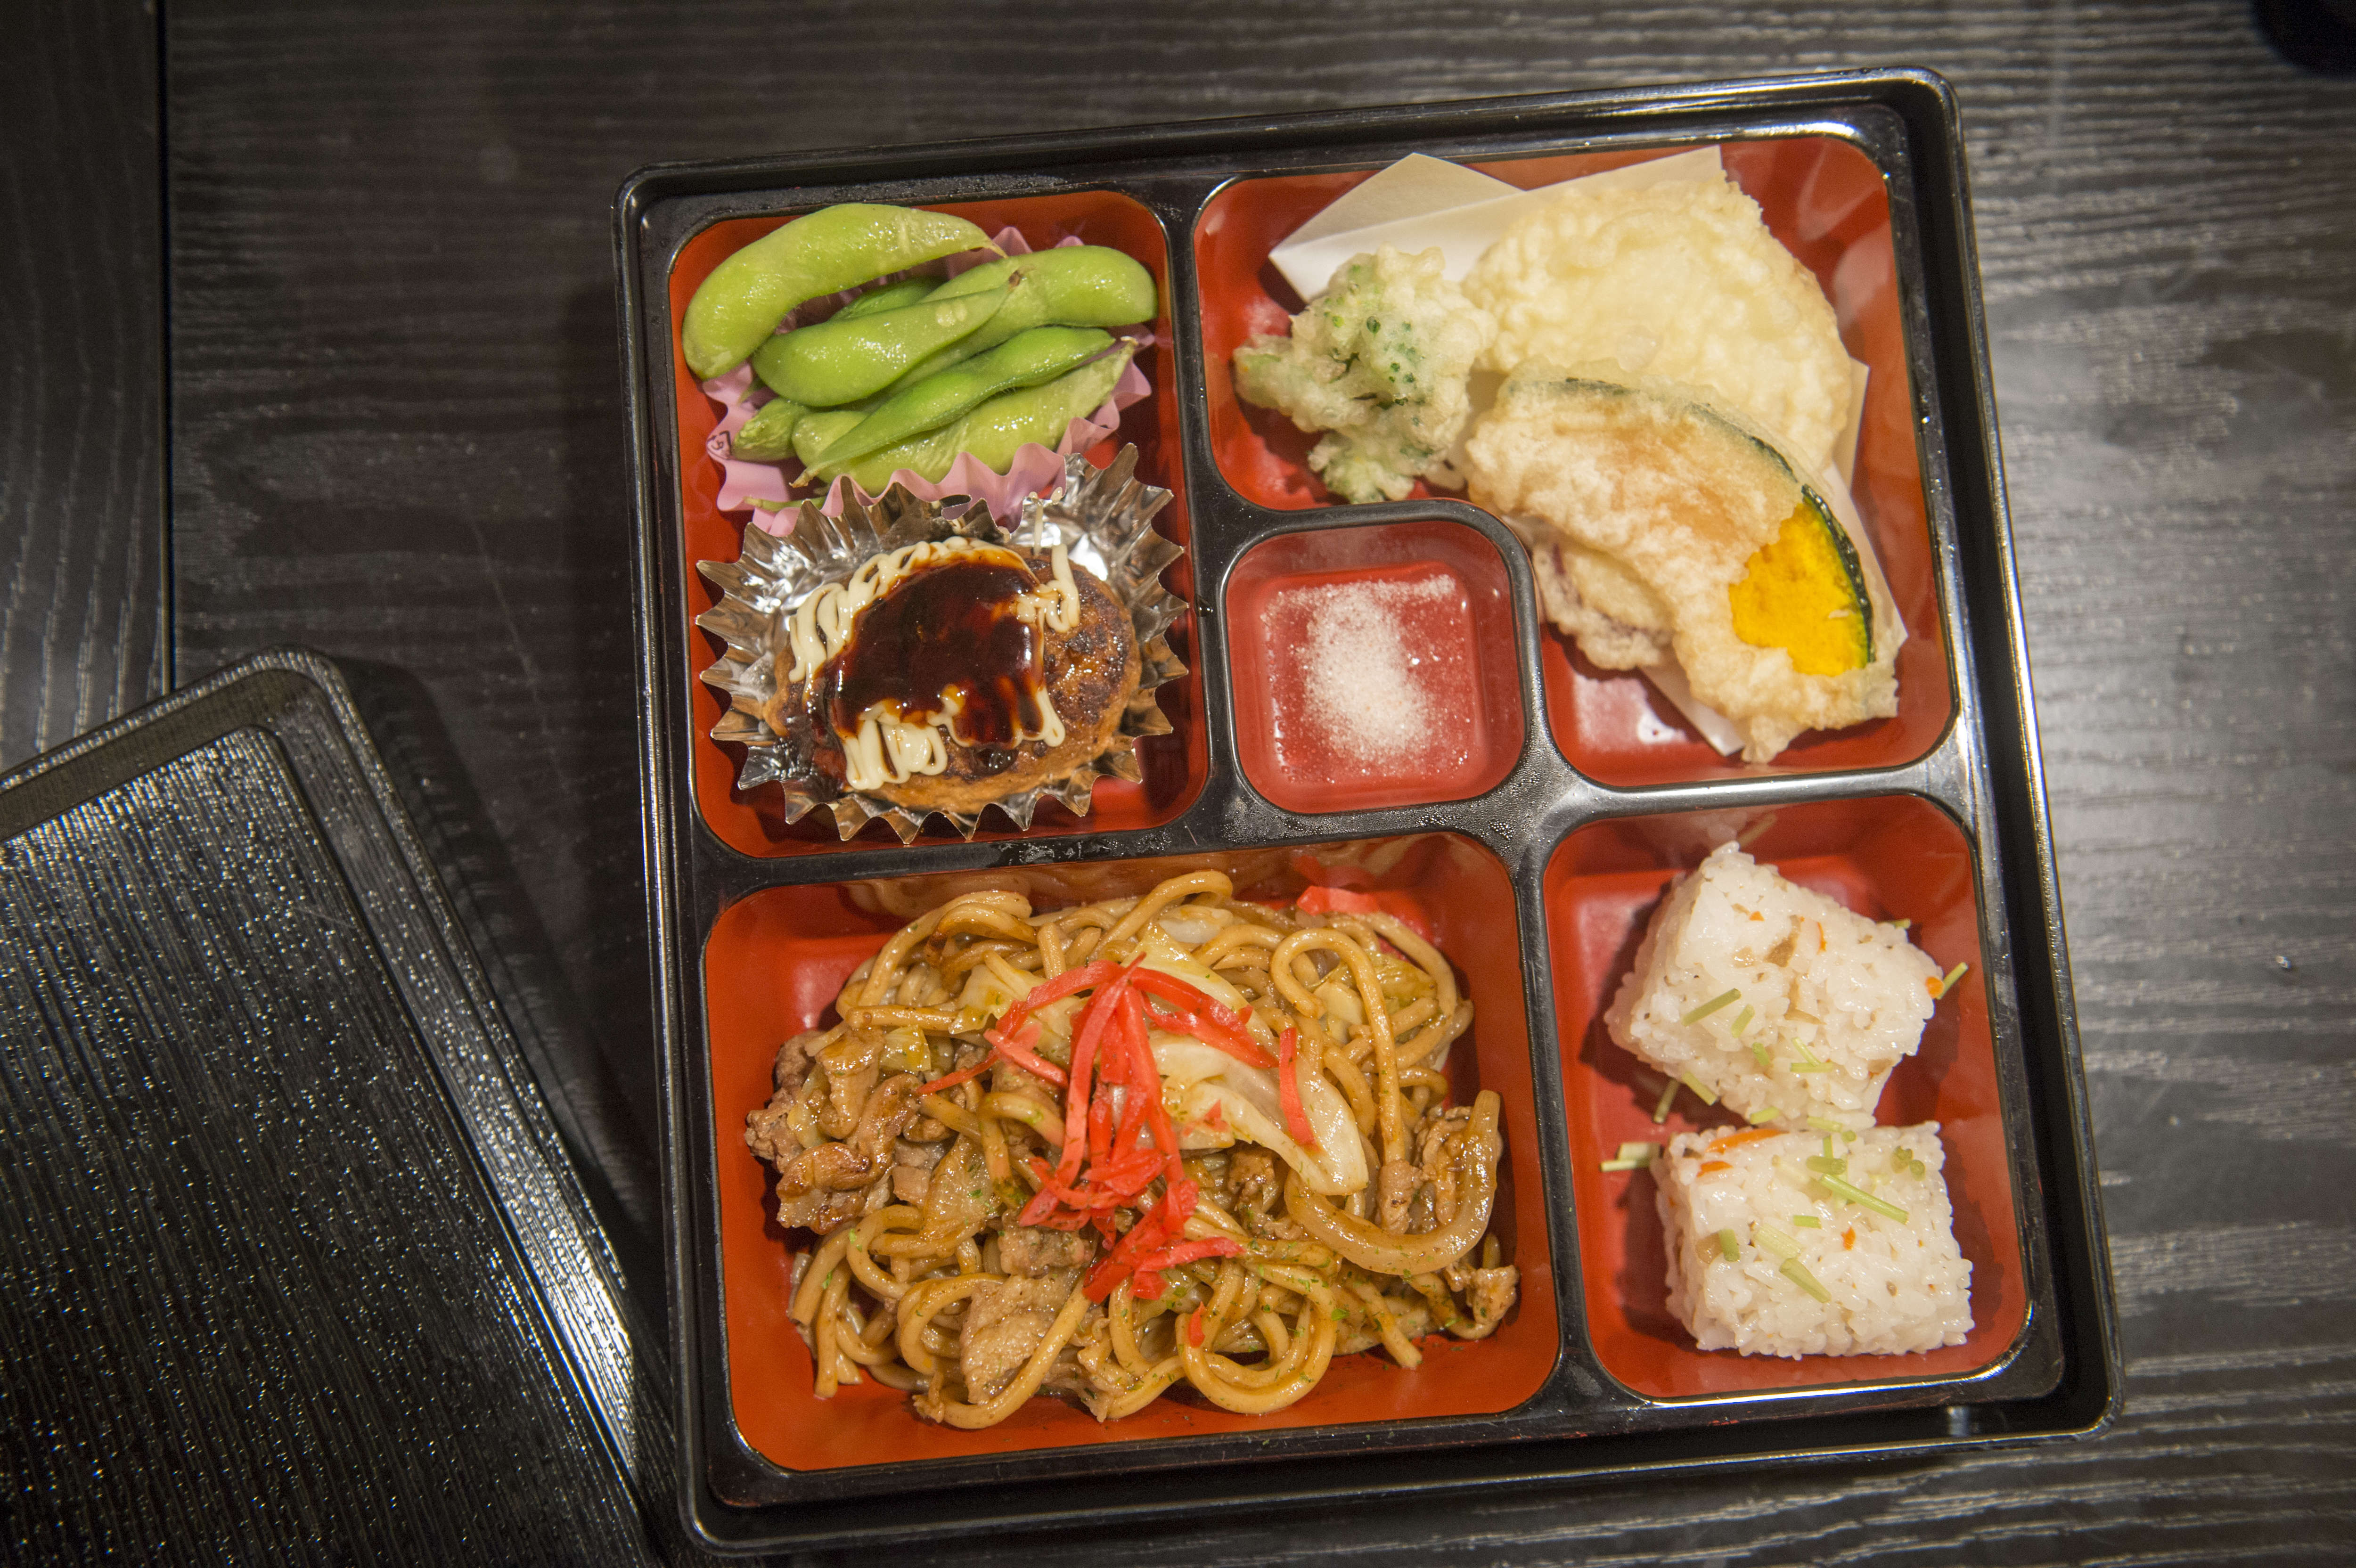 A bento box style dinner at one of the restaurants in Kyoto...